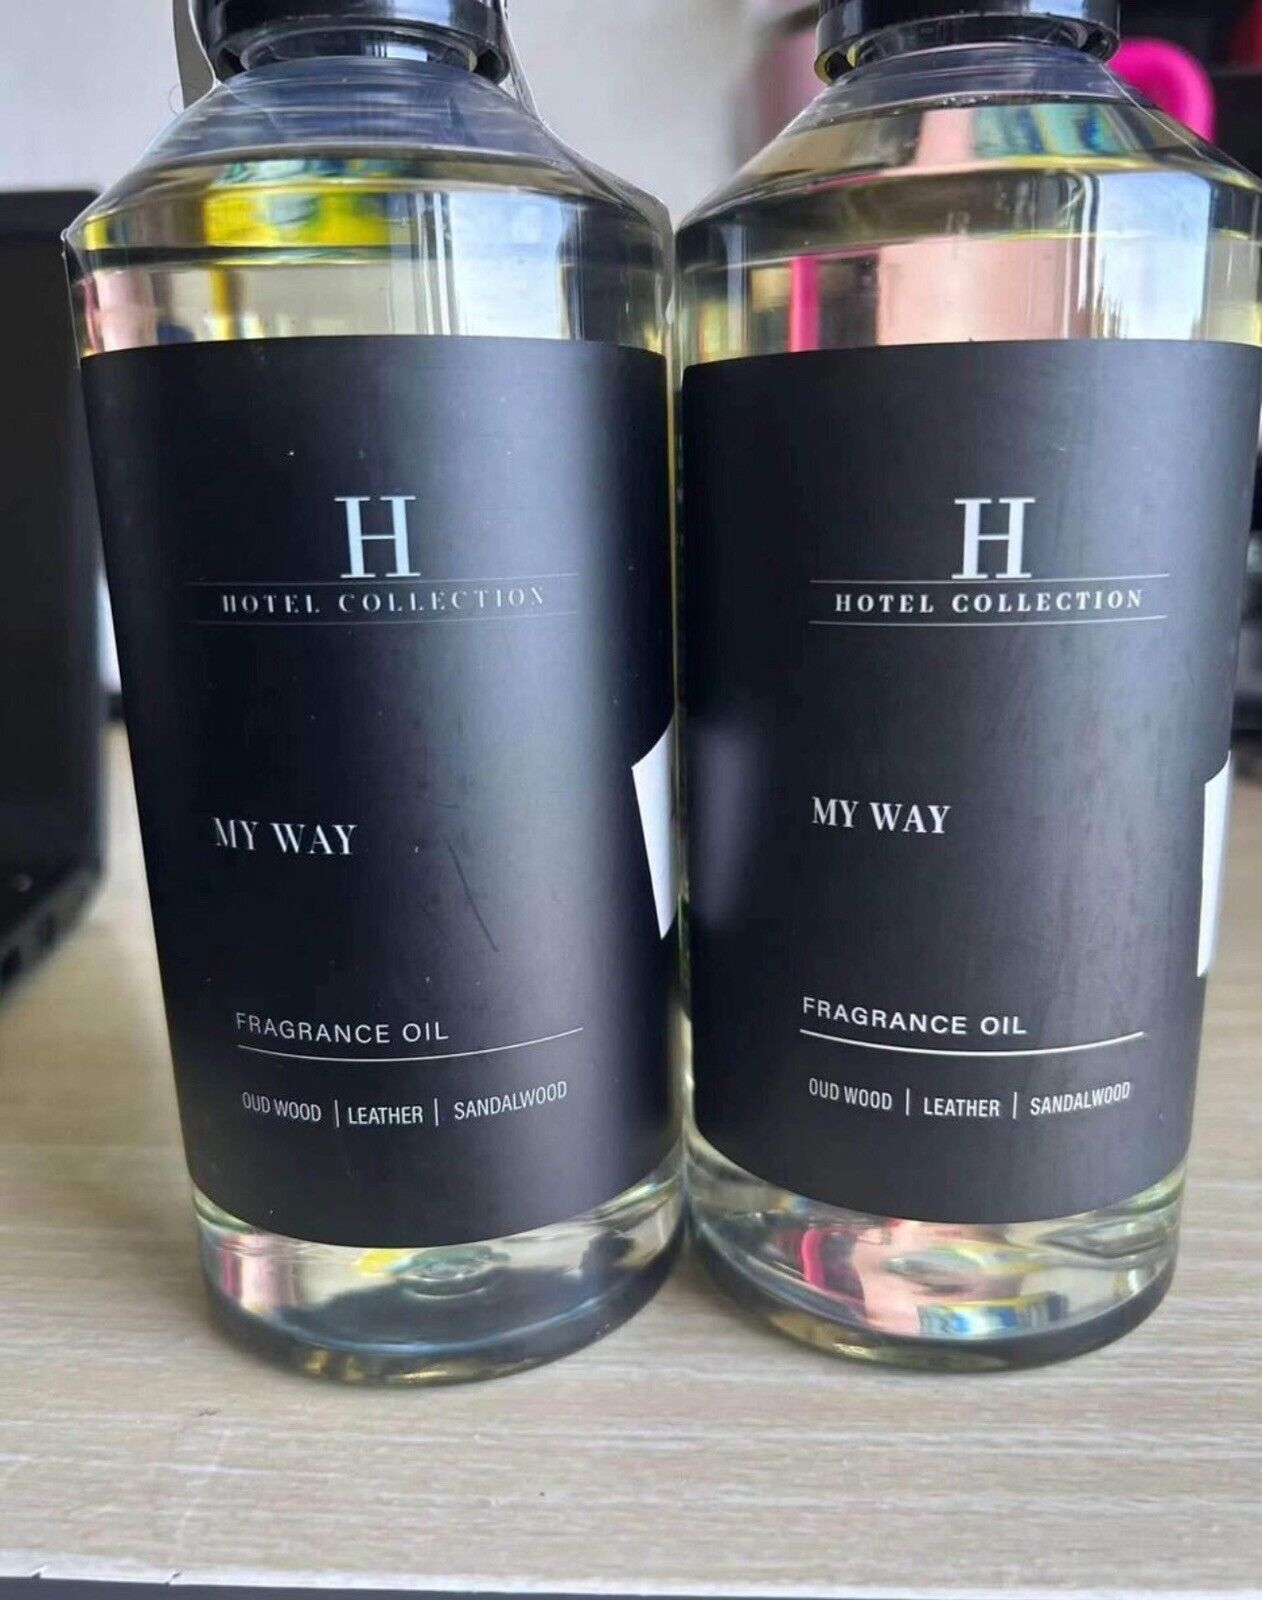 Hotel Collection - My Way Essential Oil Scent - Luxury Hotel Inspired 500ml